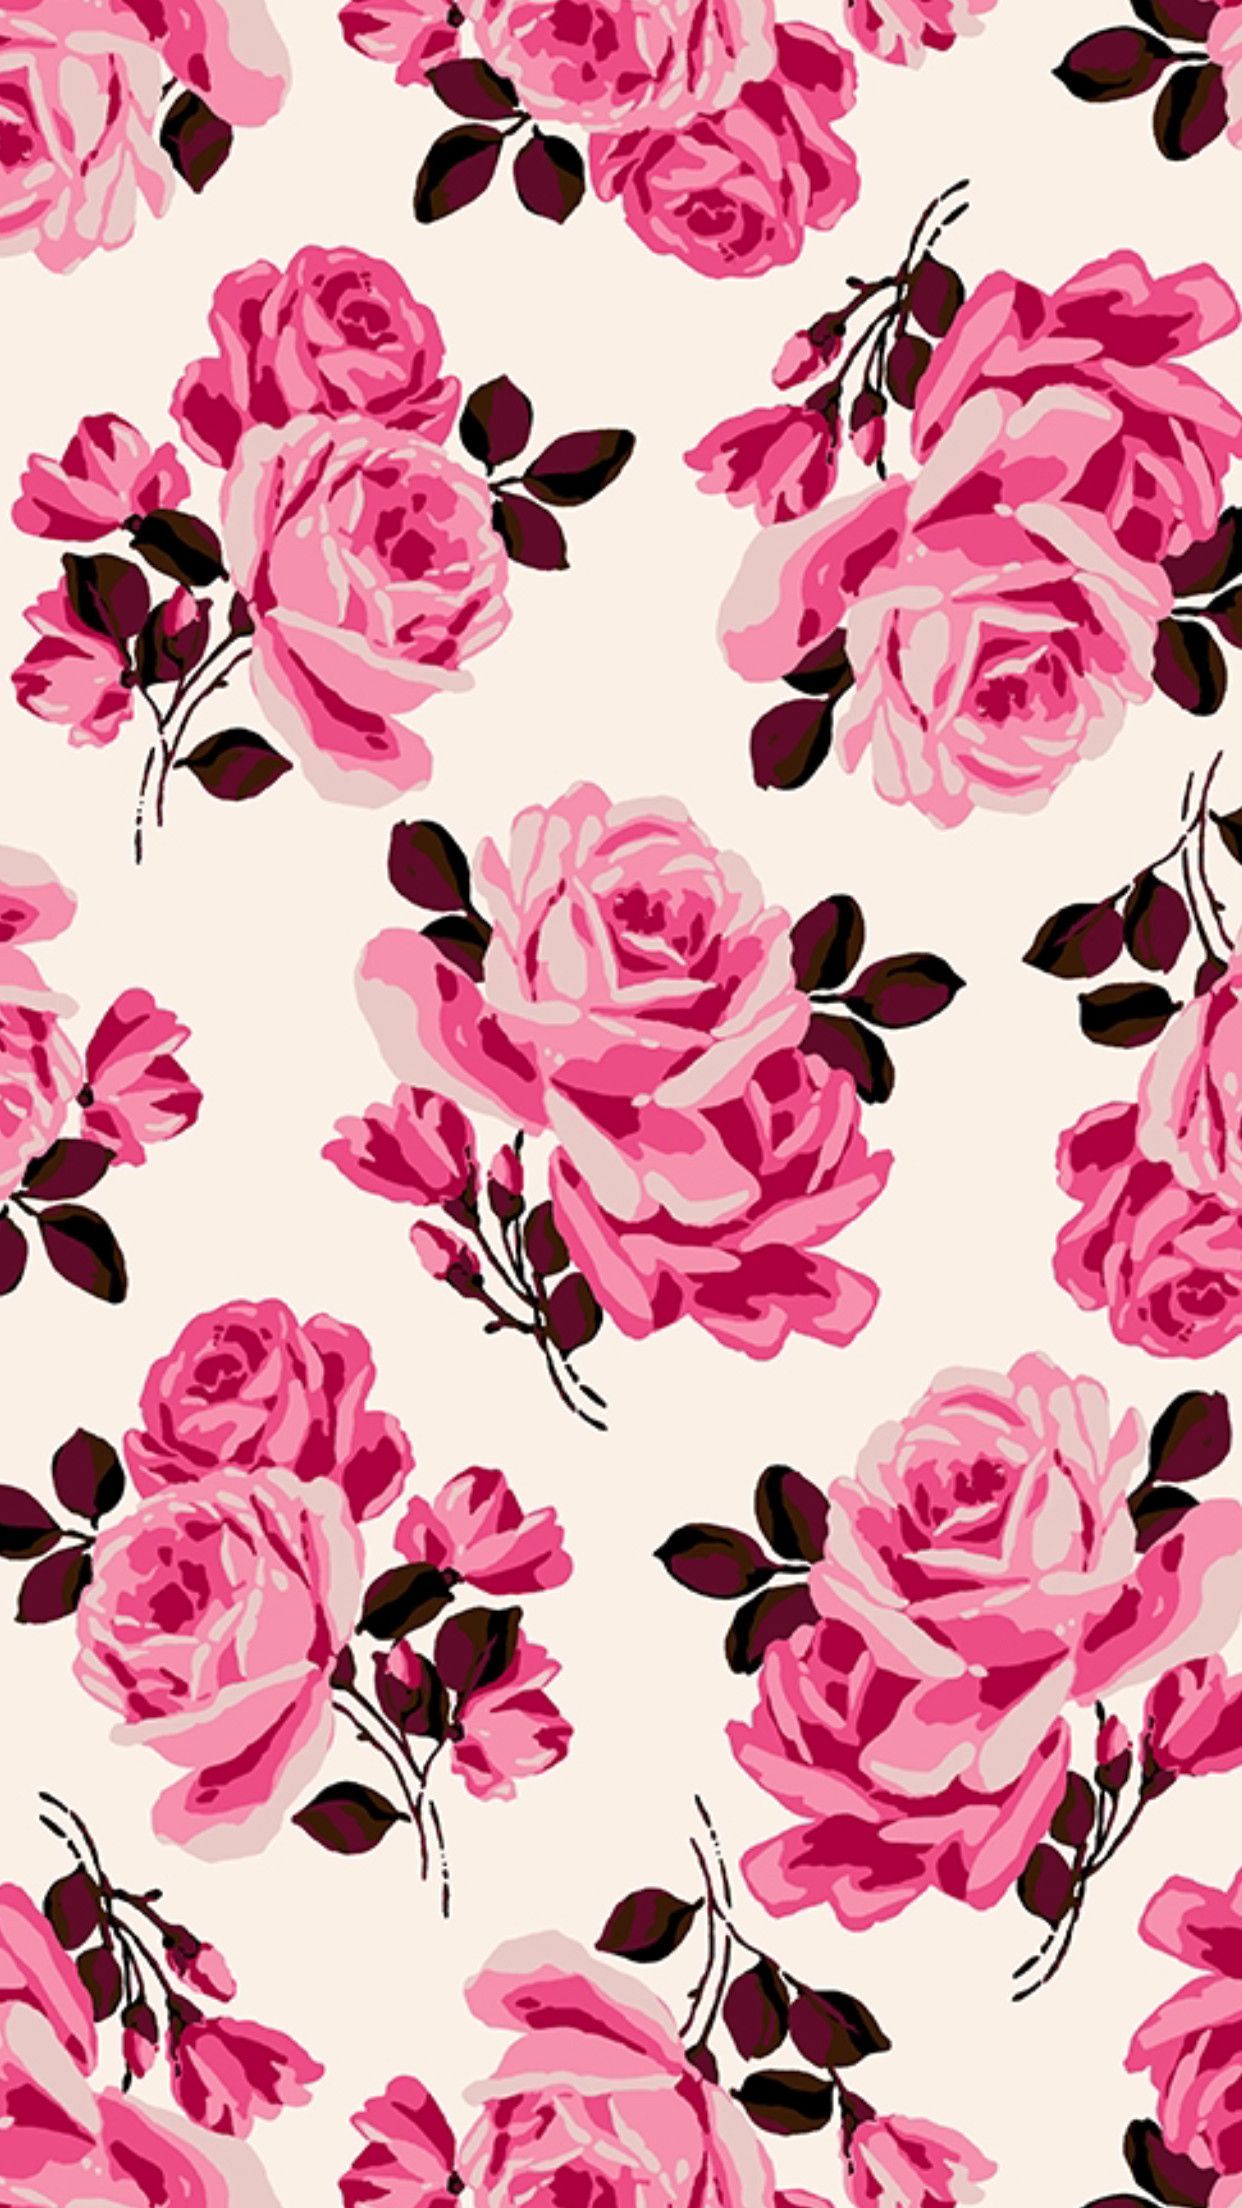 Cute Girly Flower Wallpapers on WallpaperDog